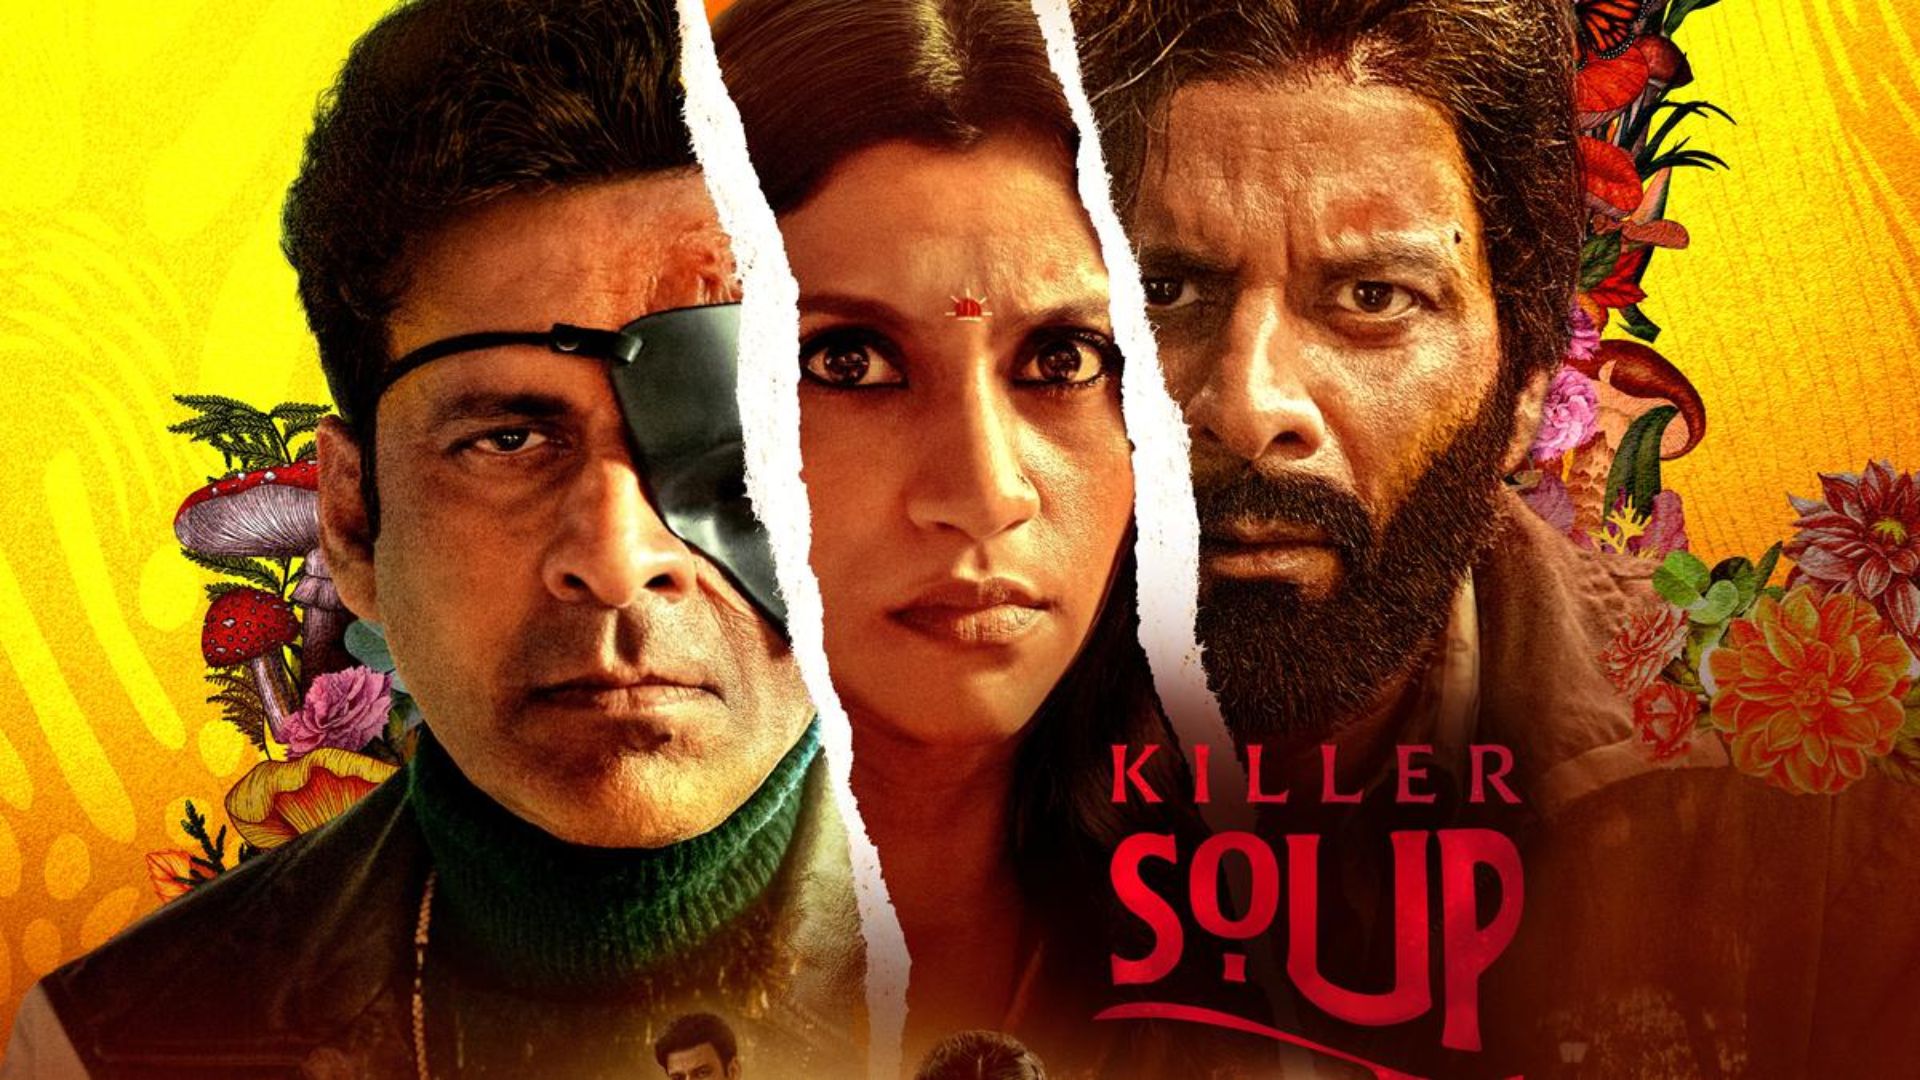 Killer Soup Review: flat writing, killed the excitement